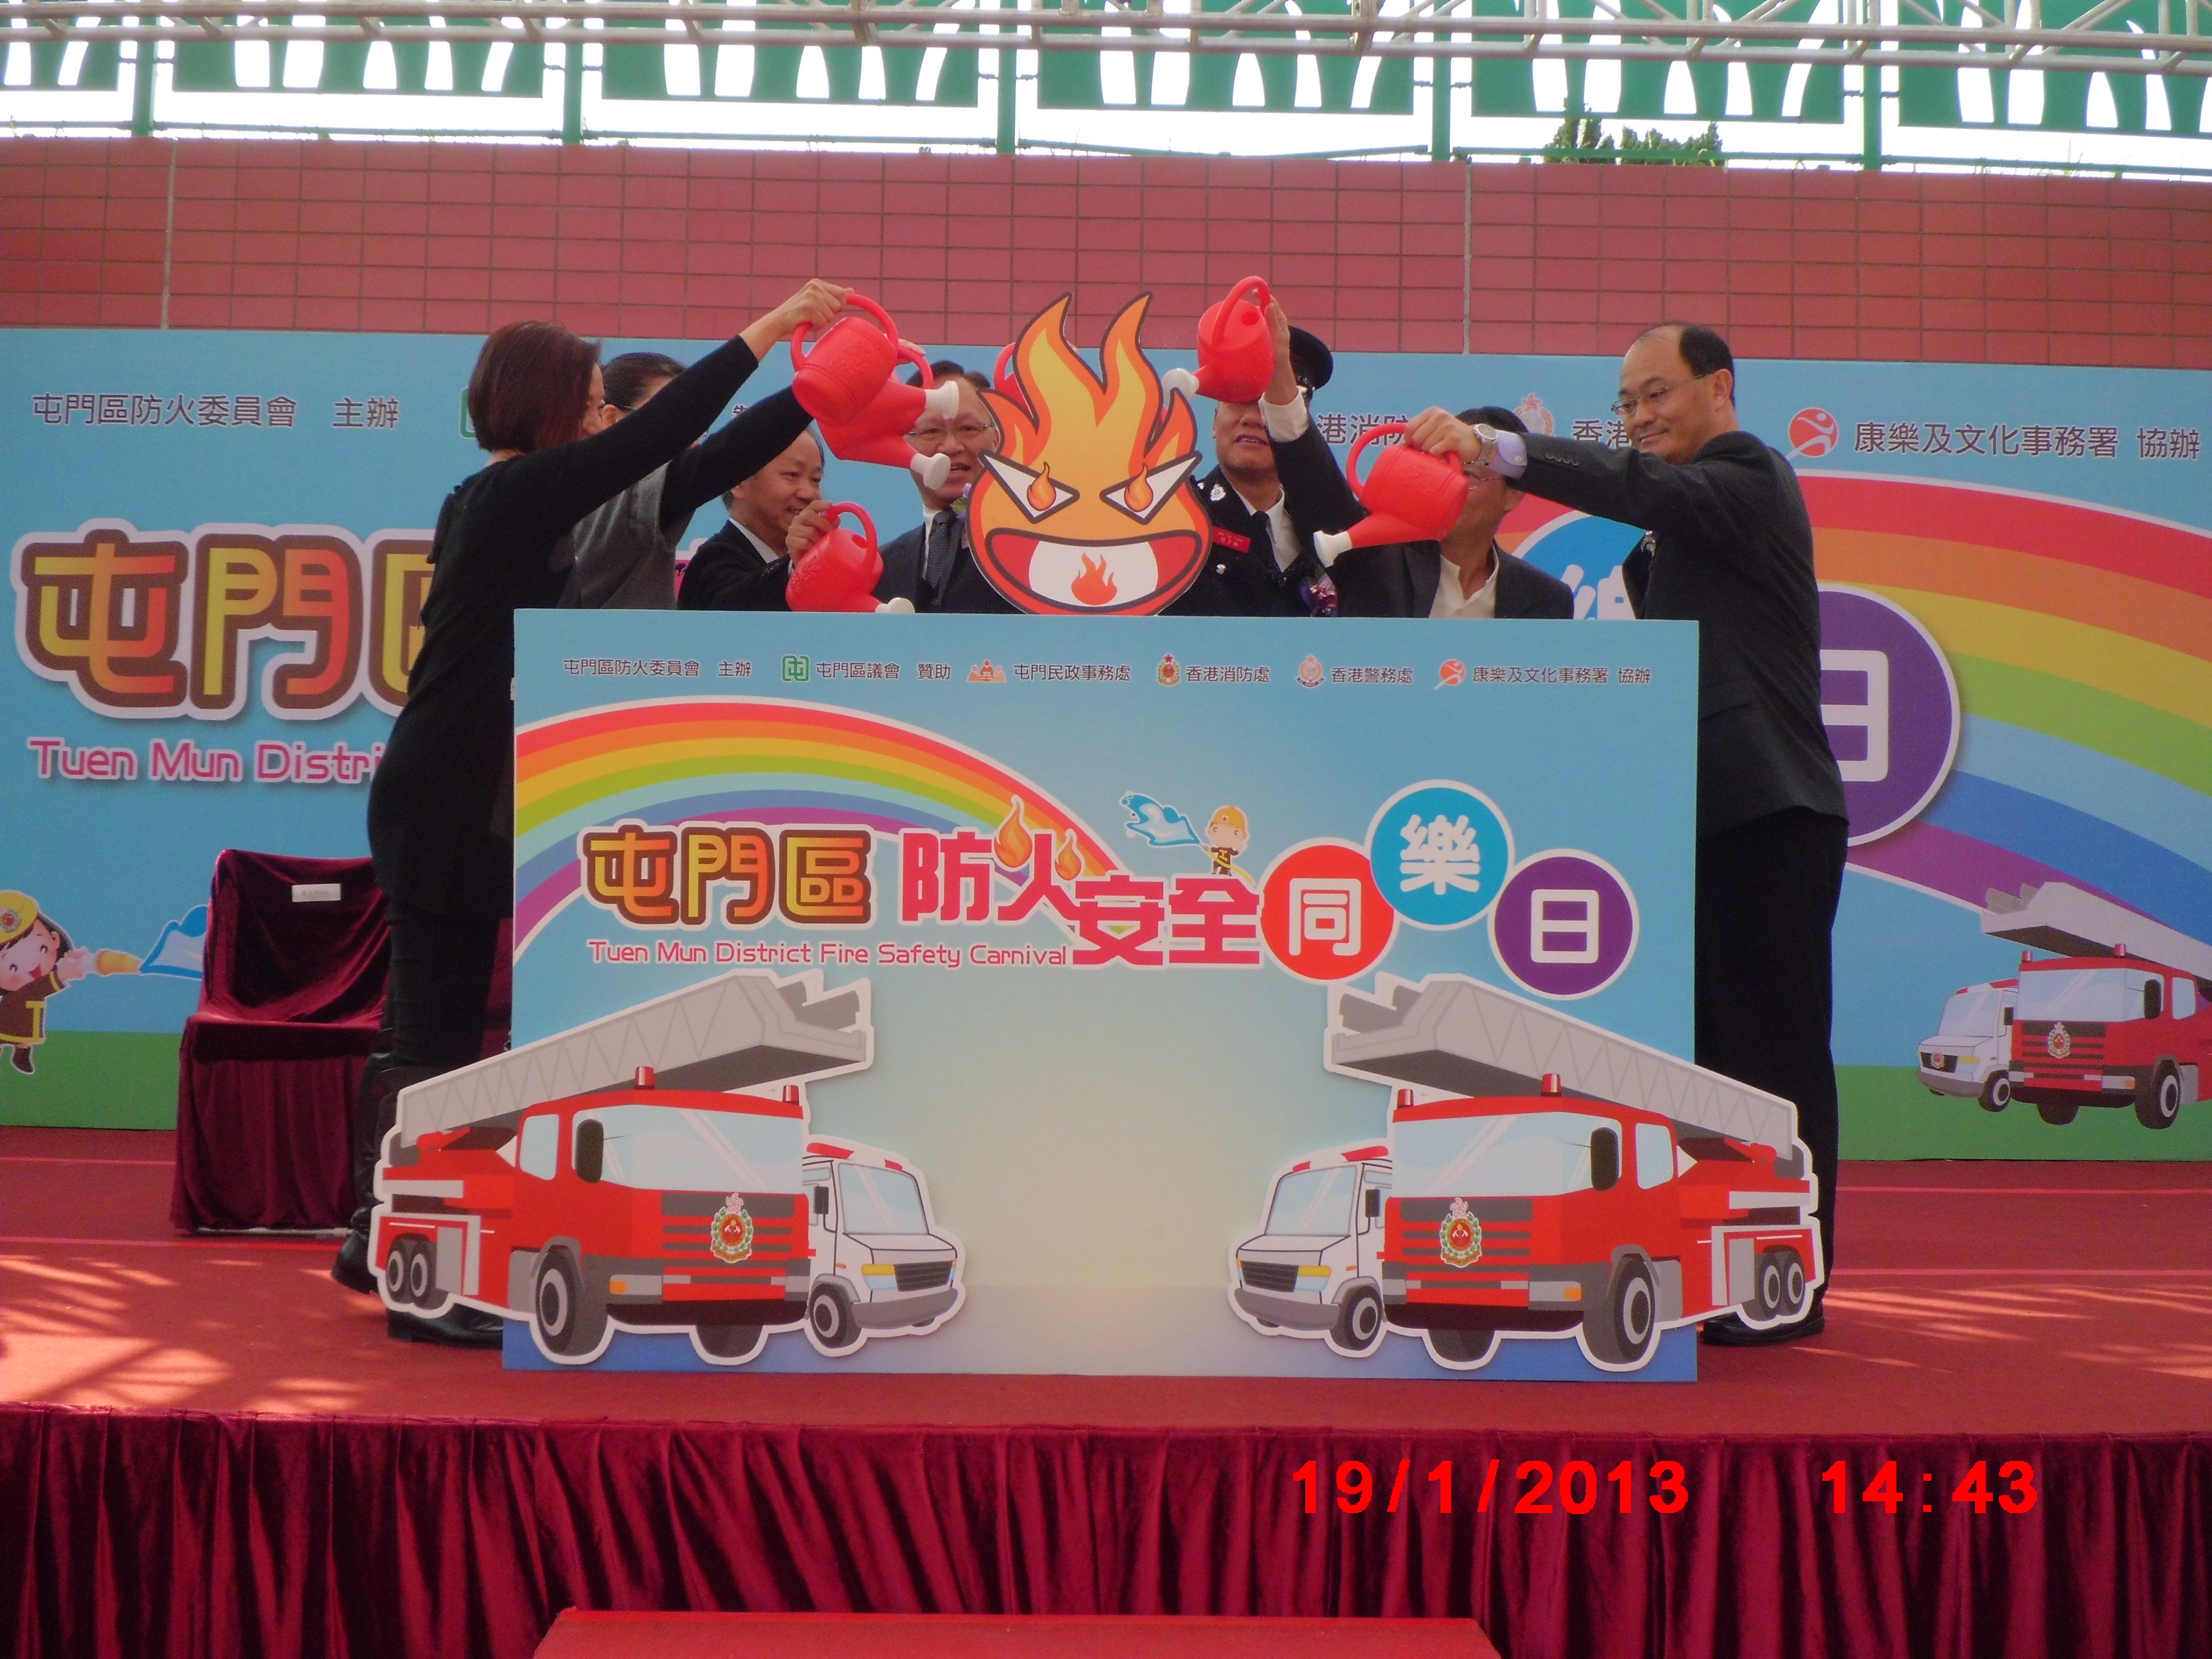 Tuen Mun District Fire Safety Carnival (19 January 2013)